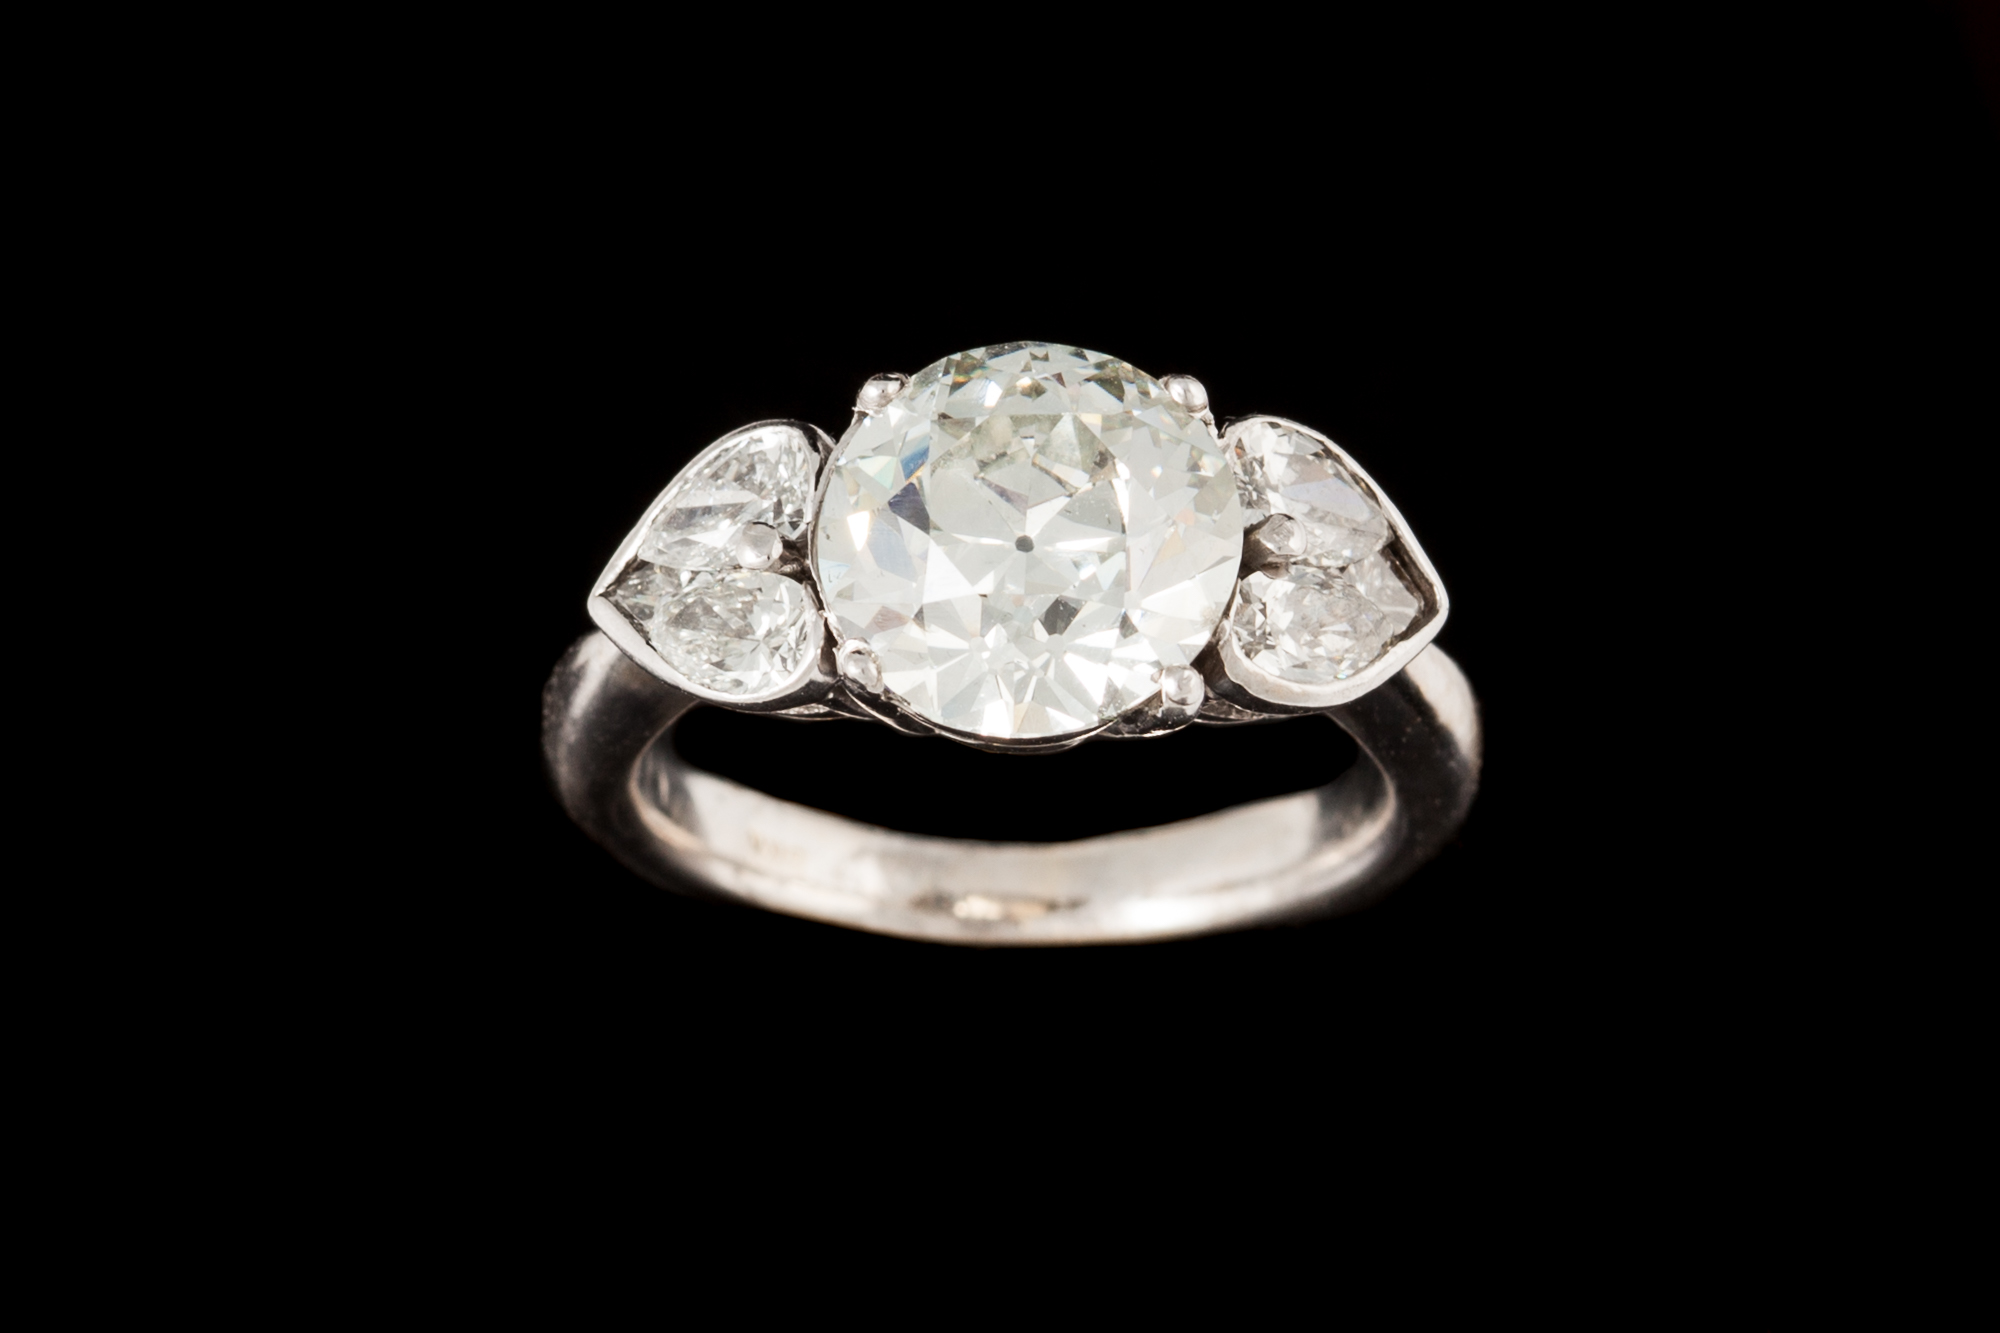 A DIAMOND FANCY SOLITAIRE RING, one round old European cut diamond of approx 3.